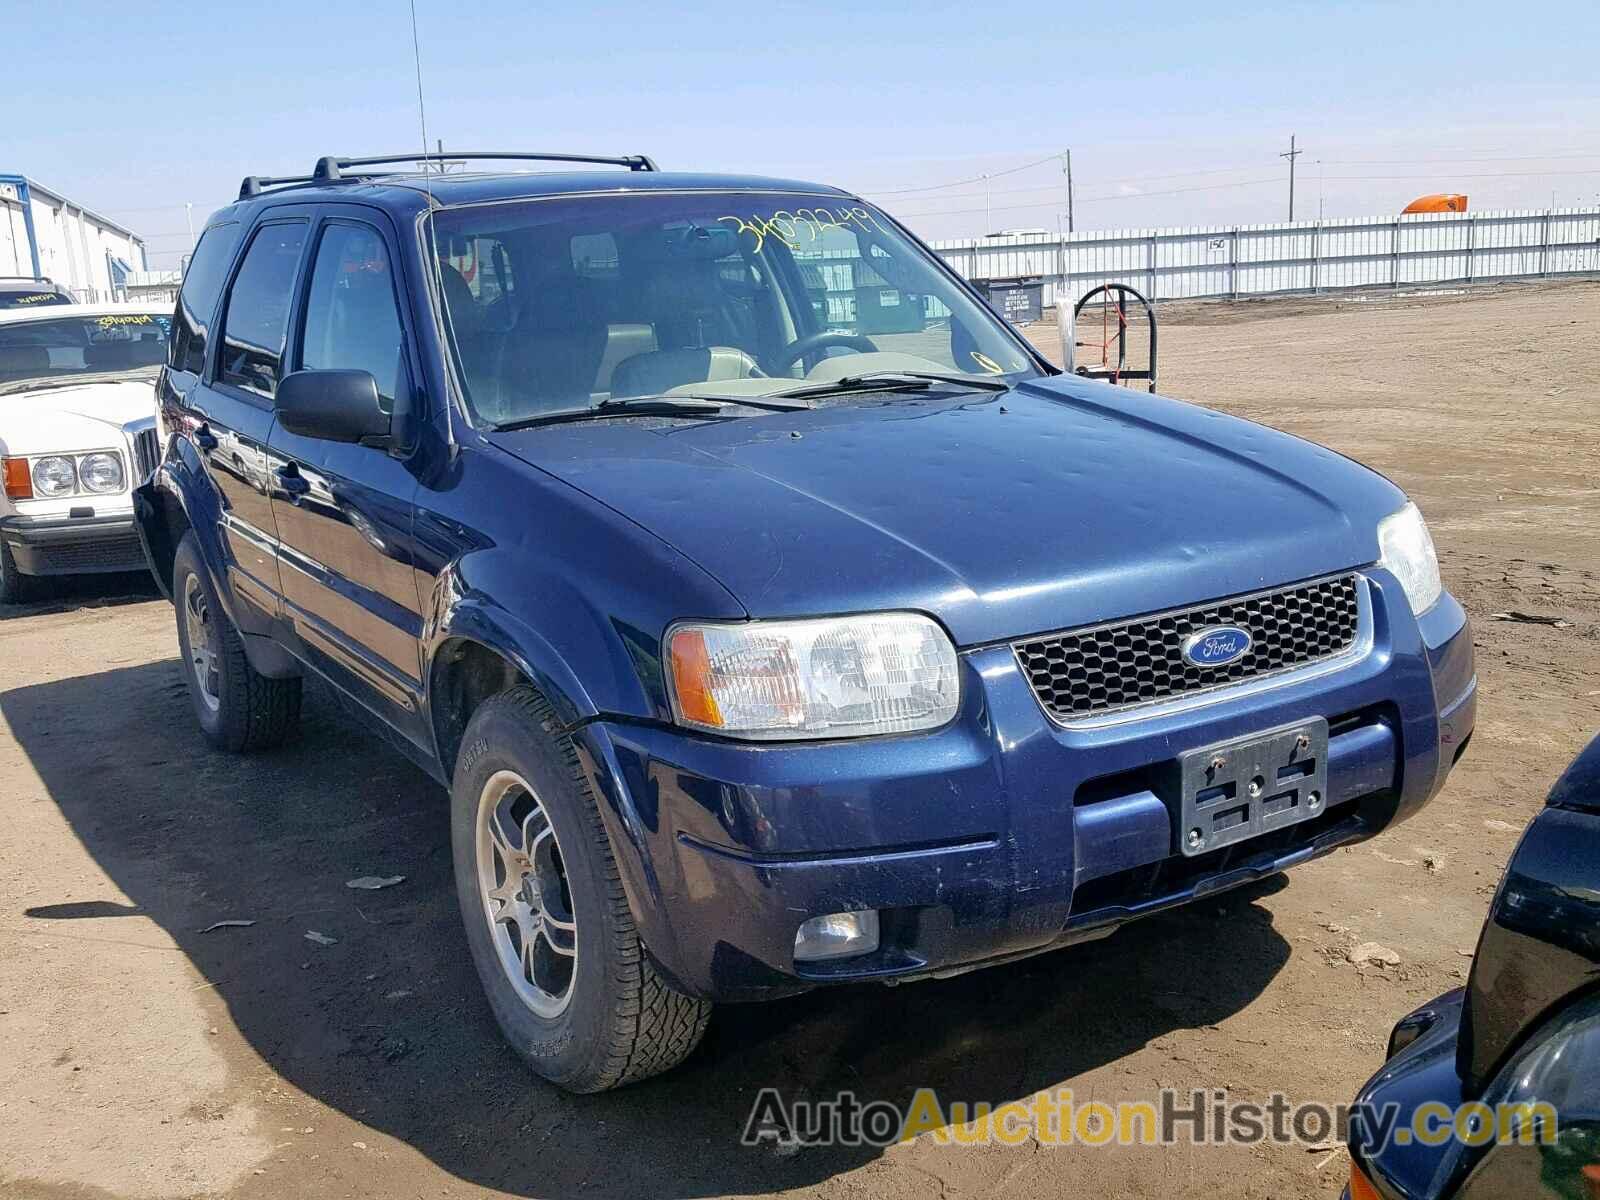 2003 FORD ESCAPE LIMITED, 1FMCU94133KD75202